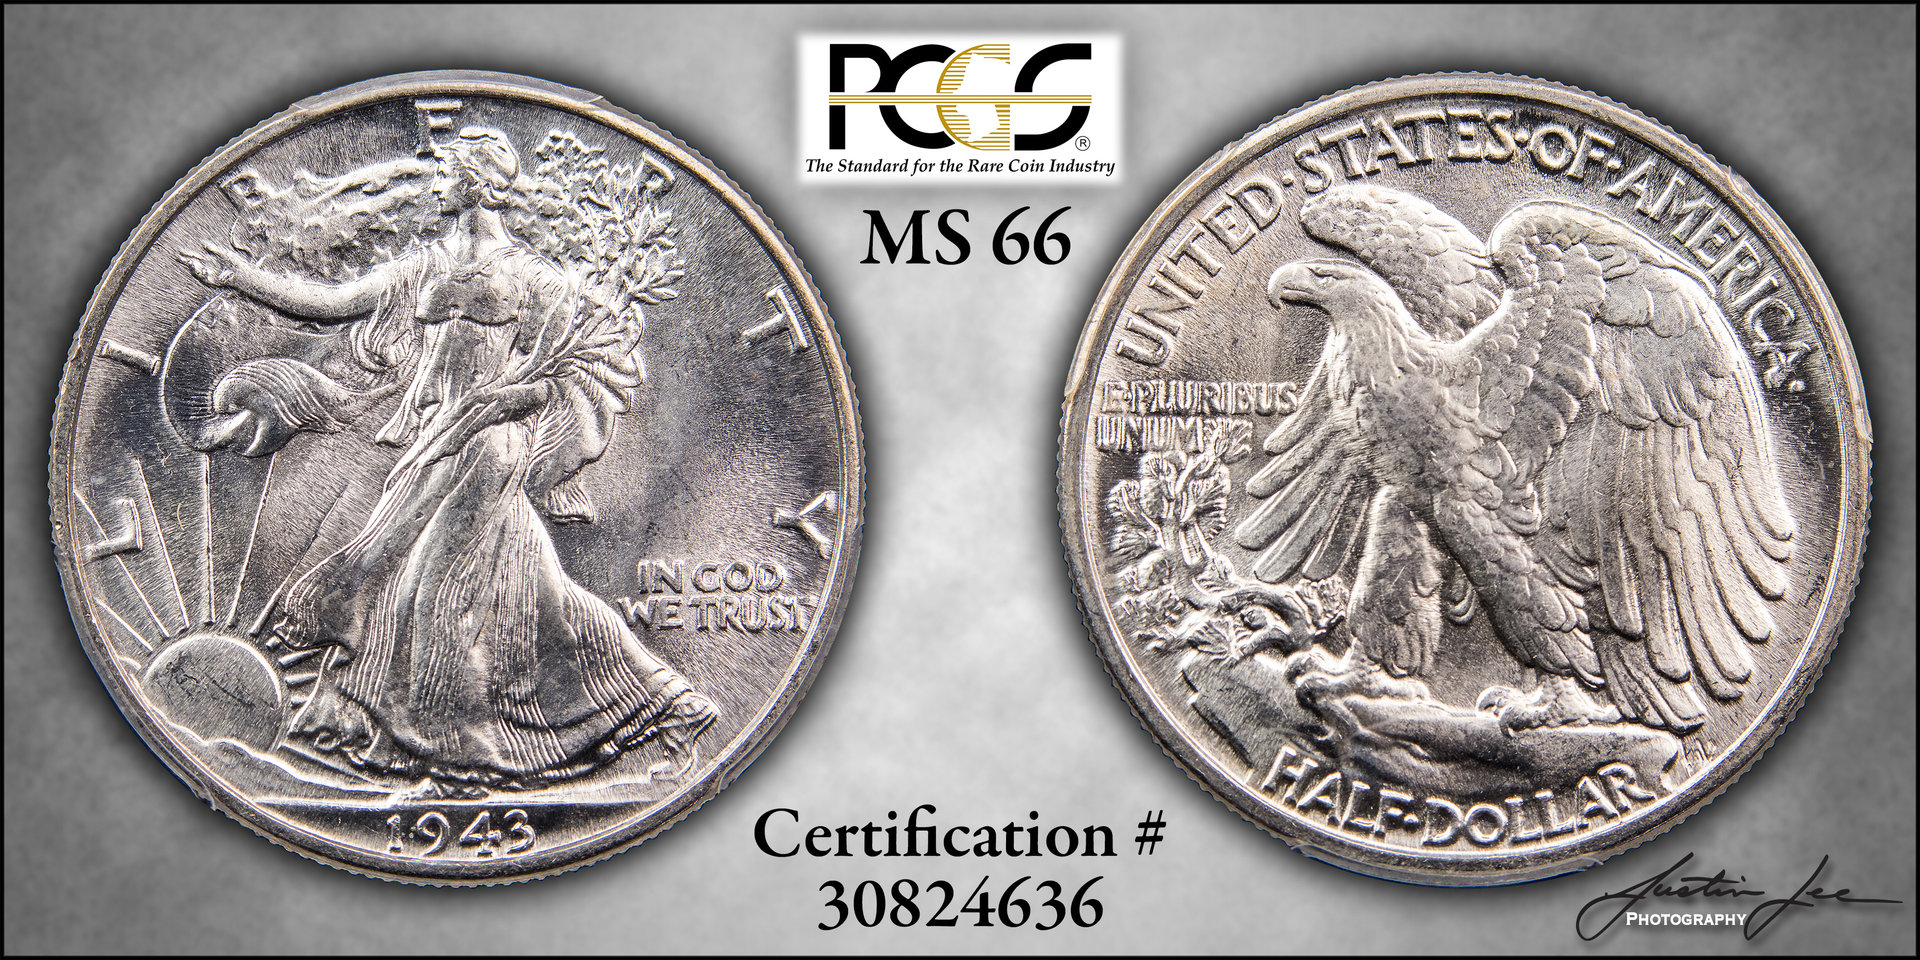 1943 Certified Coin Fancy Grey Background Small.jpg